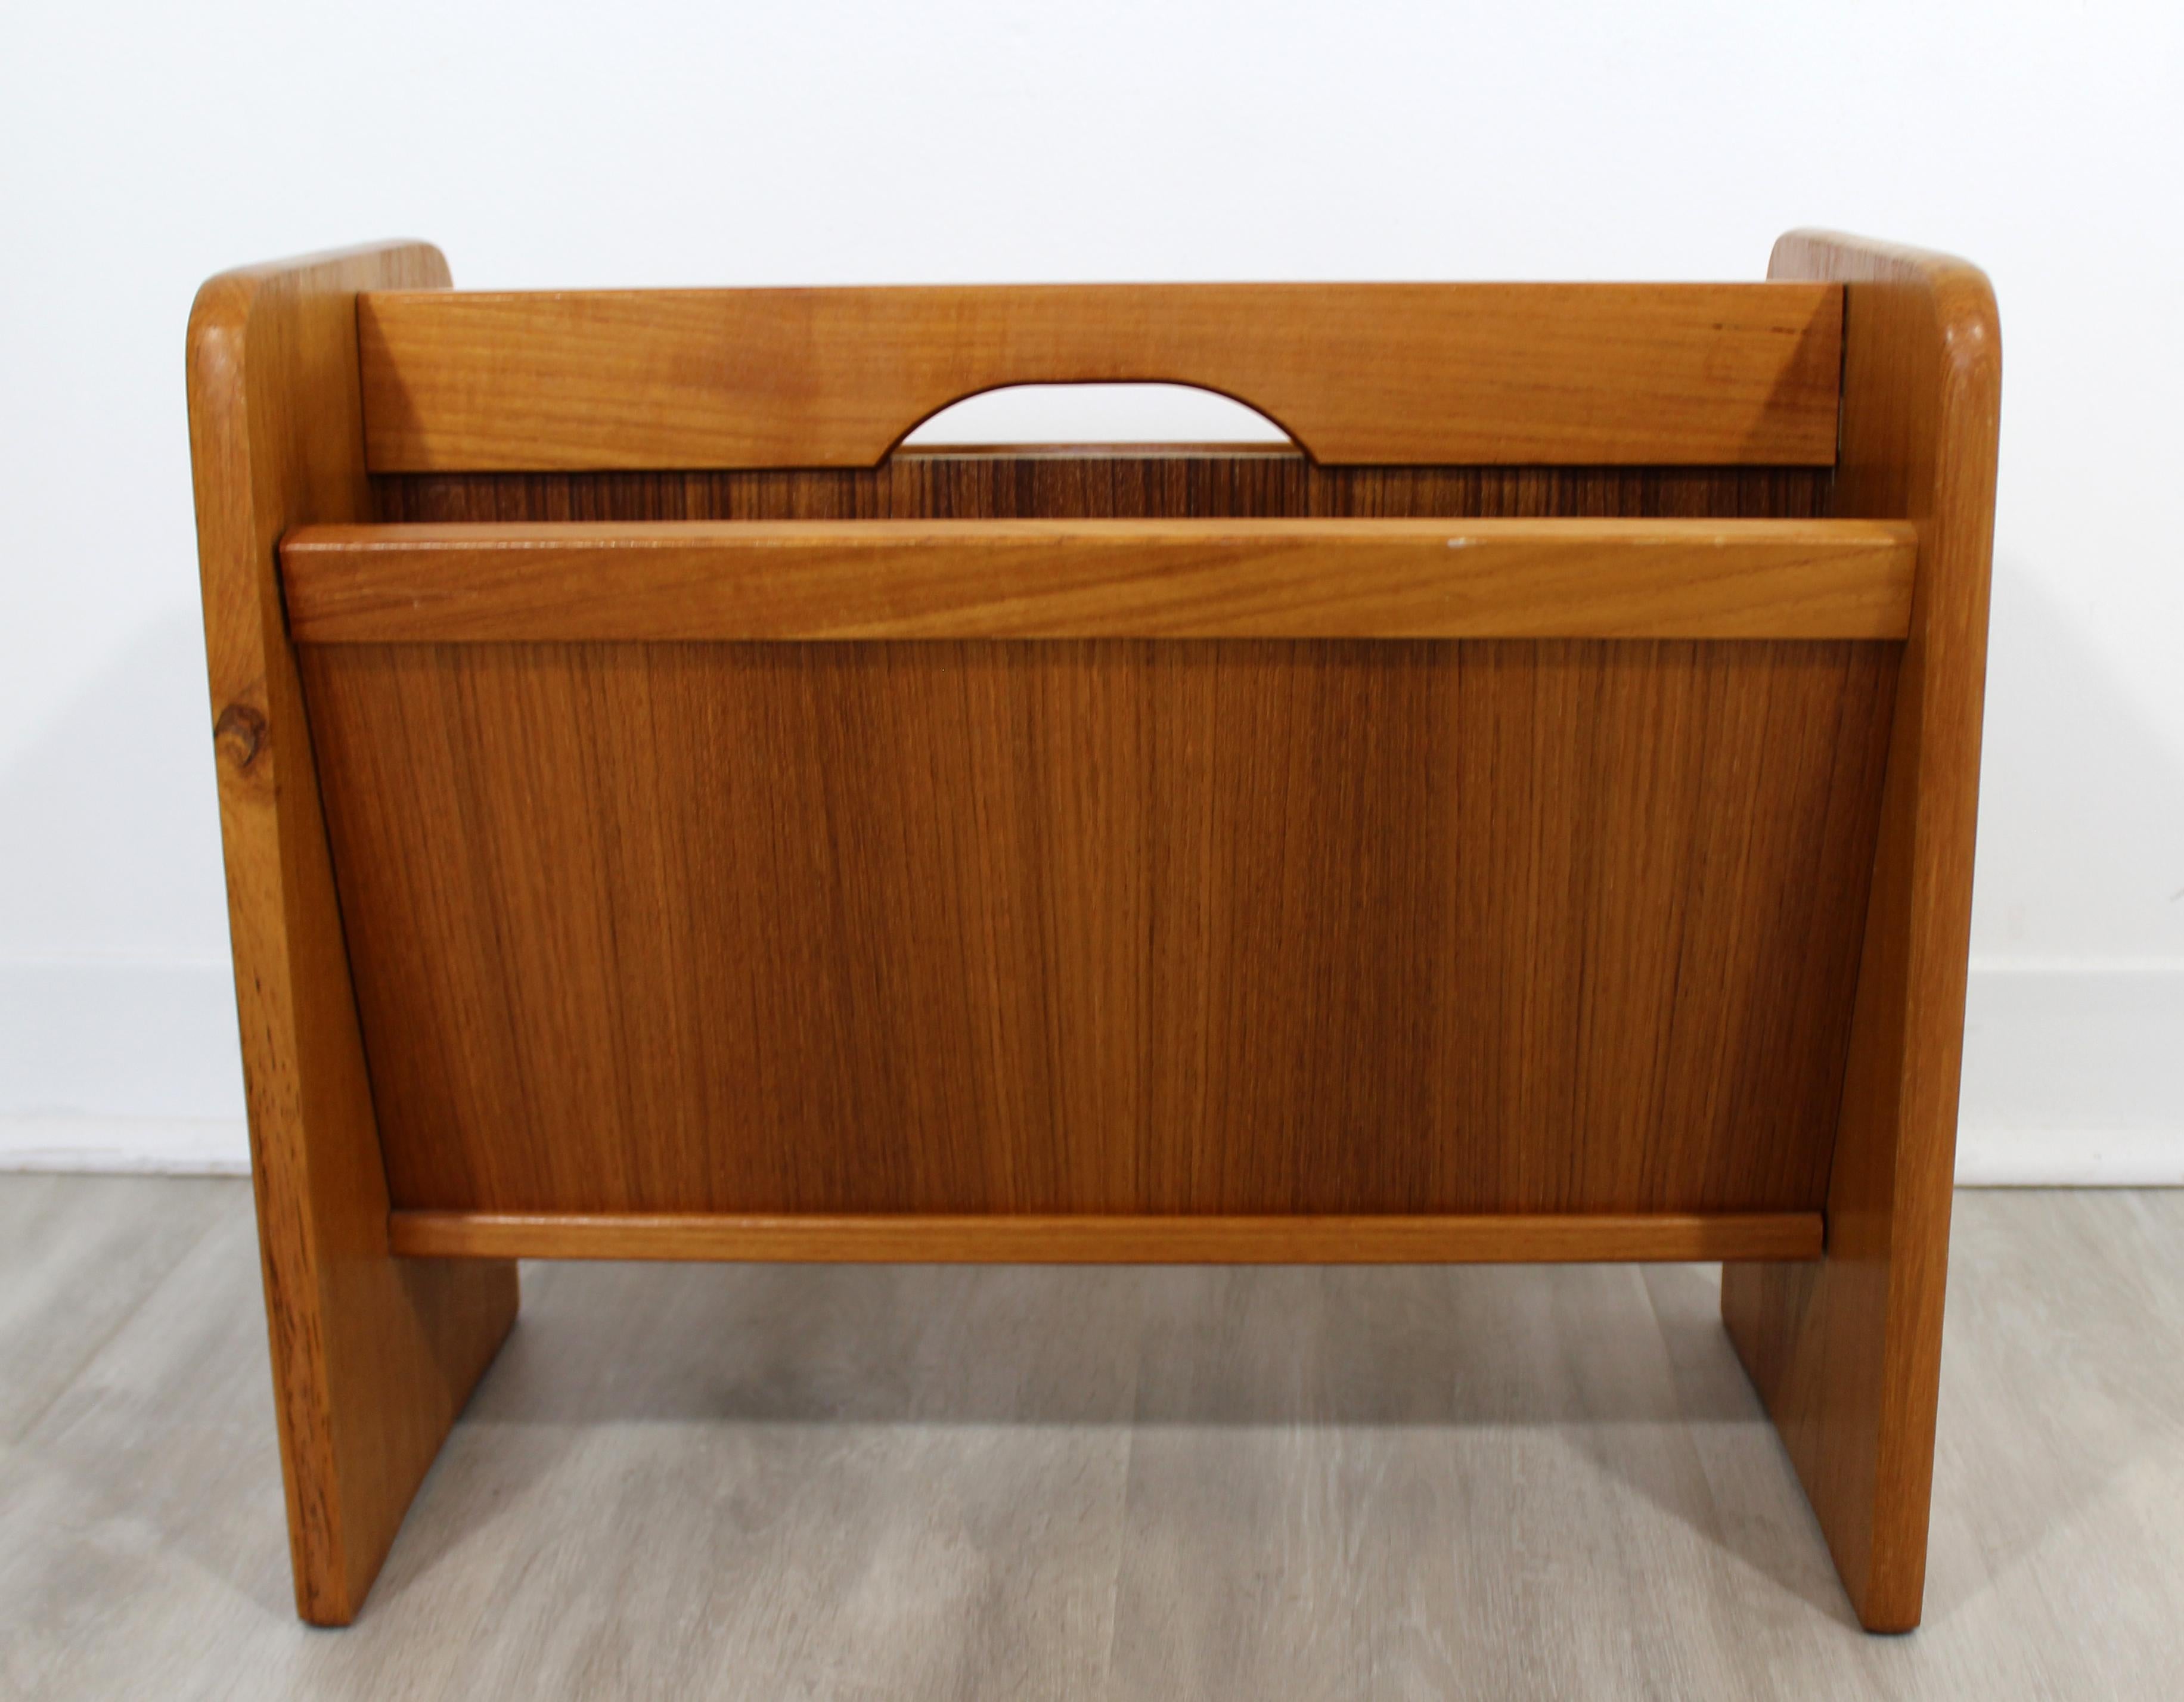 For your consideration is a fantastic, double sided, teak magazine rack, made in Denmark, by FBJ Mobler, circa 1980s. In very good vintage condition. The dimensions are 19